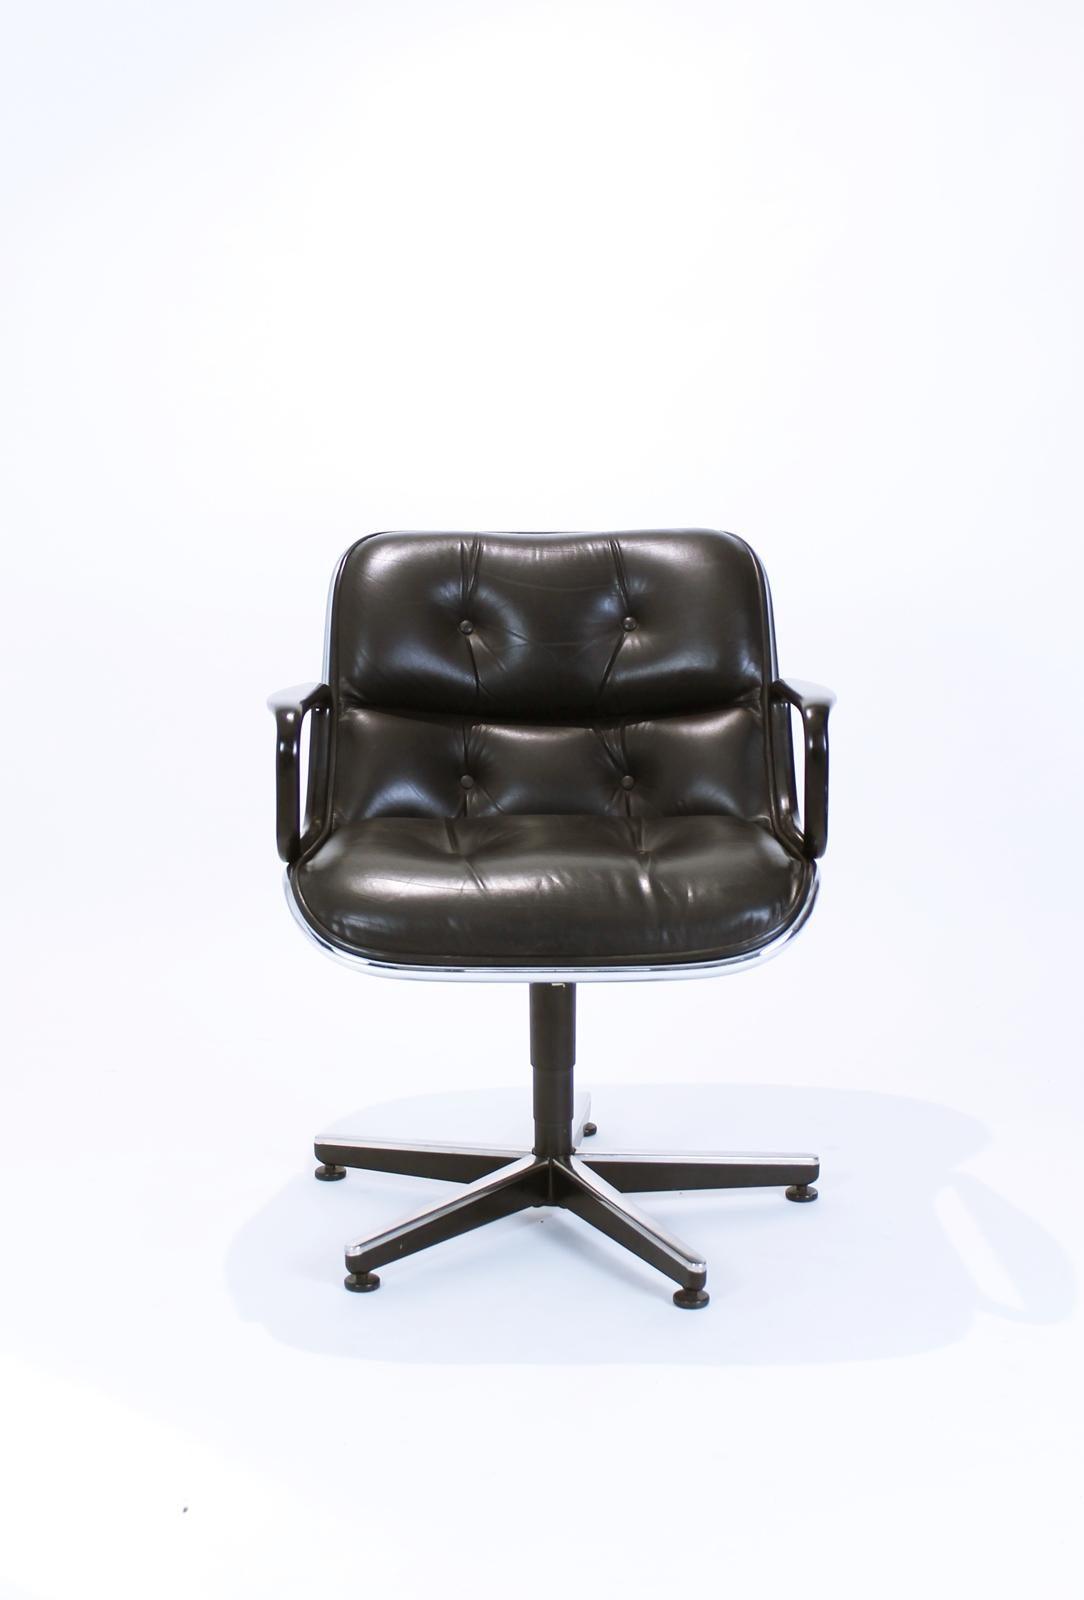 American Midcentury Executive Swivel Armchair by Charles Pollock for Knoll International For Sale